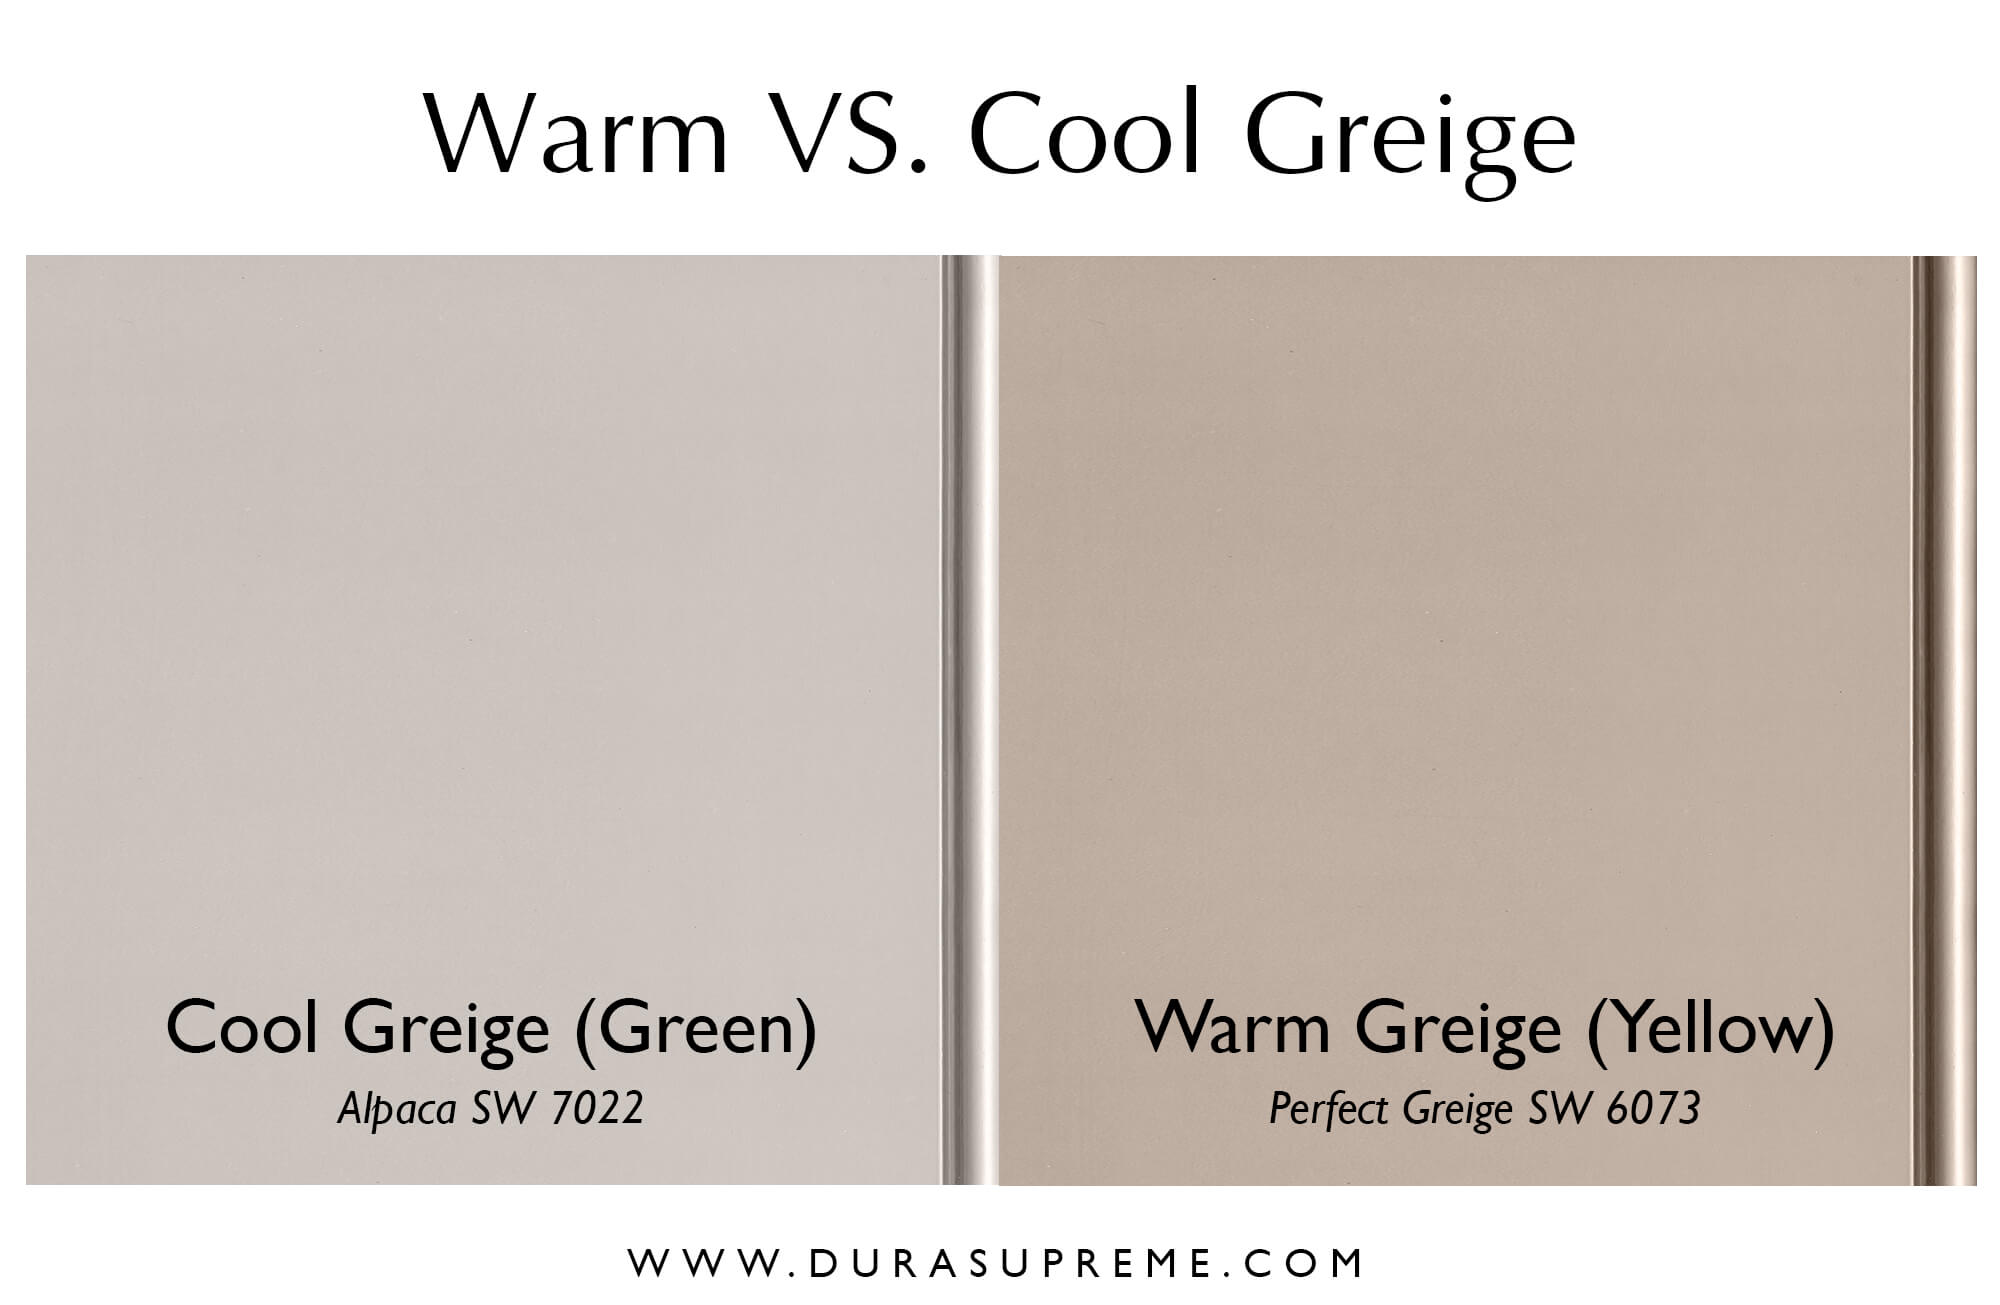 The 2 primary Undertones of the color Greige, cool green-greige and warm yellow-greige. Featuring Alpaca SW7022 and Perfect Greige SW6073 by Sherwin-Williams.